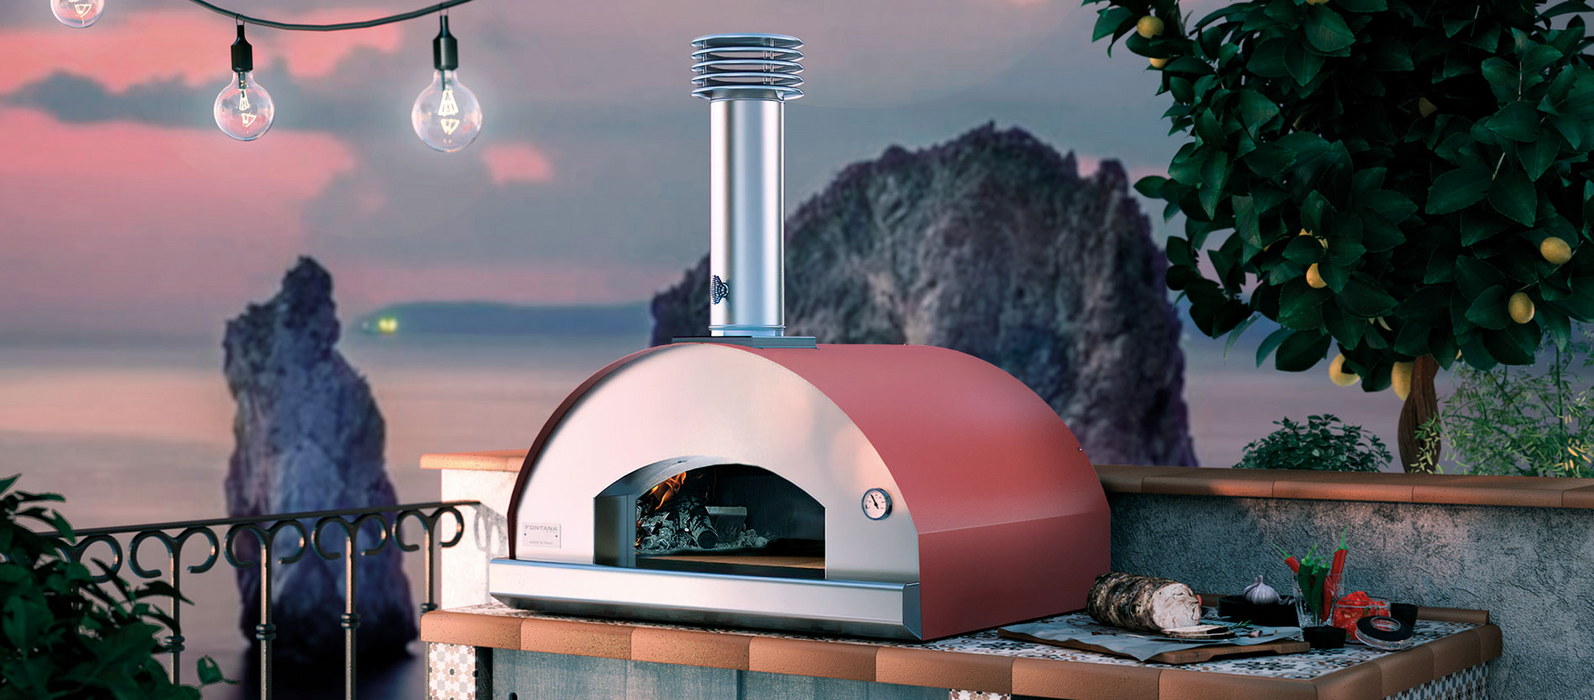 Fontana Mangiafuoco Rosso Build In Wood Pizza Oven